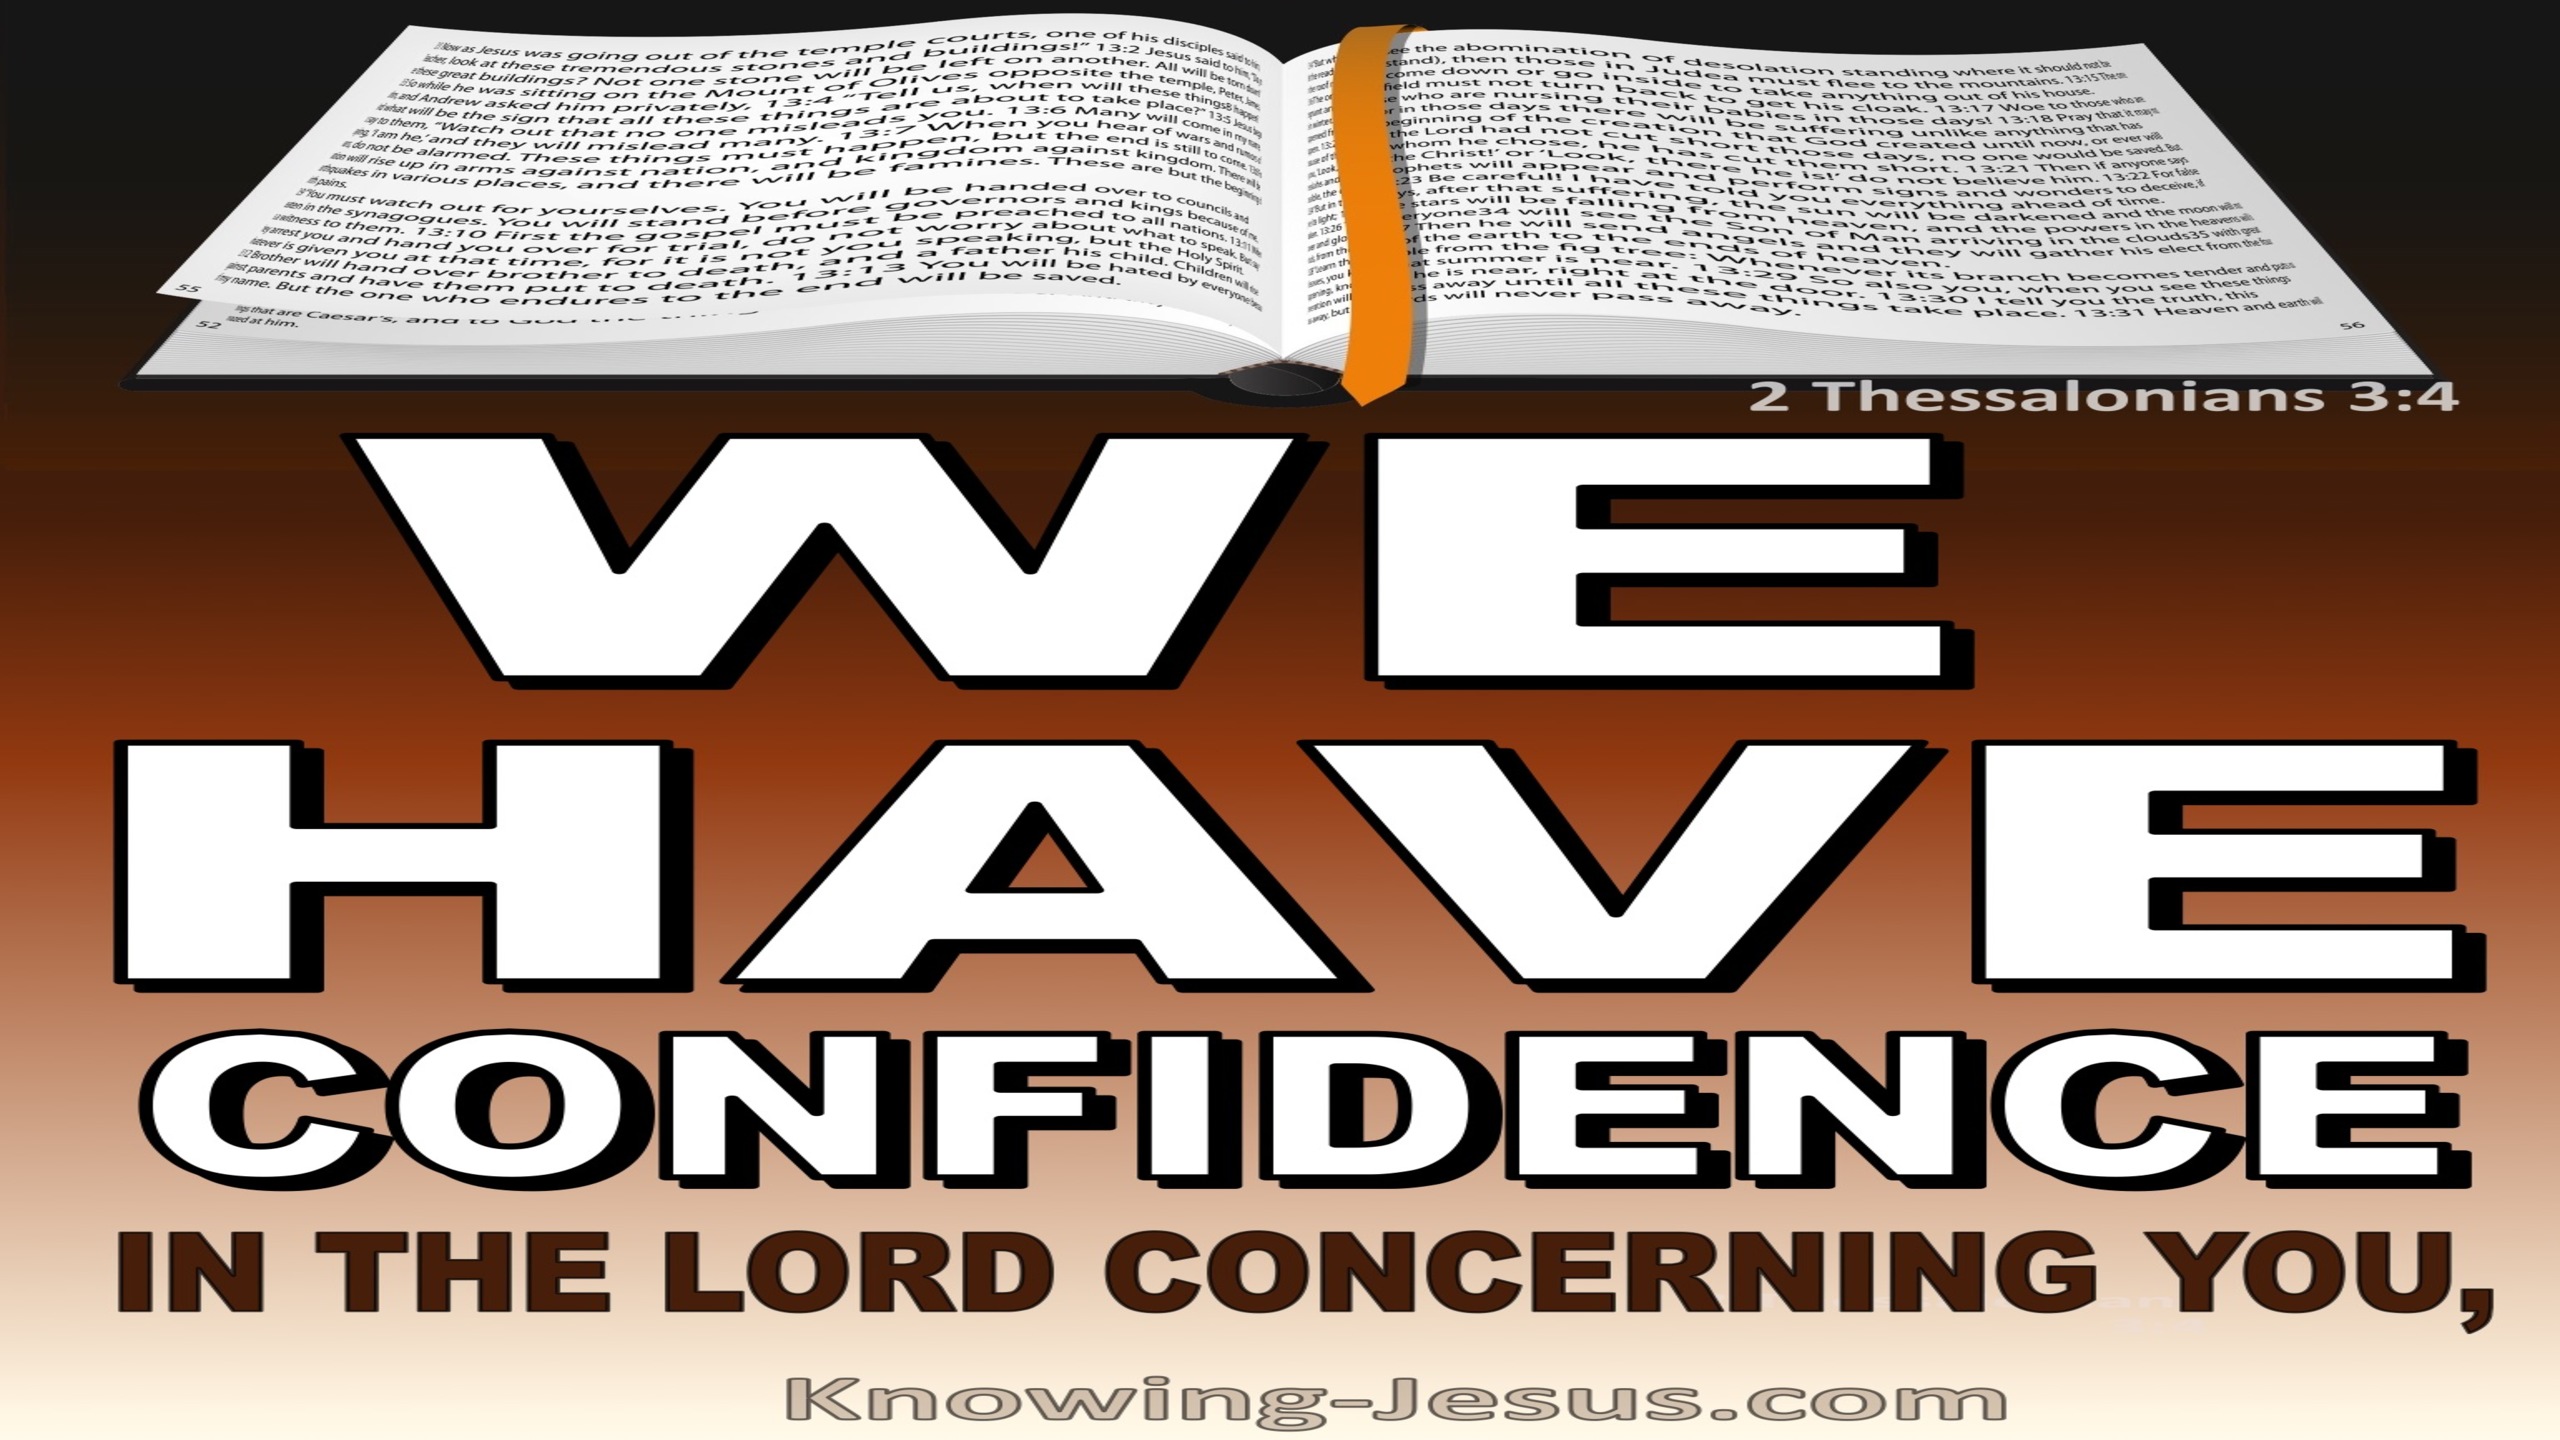 2 Thessalonians 3:4 We Have Confidence In The Lord Concerning You (white)